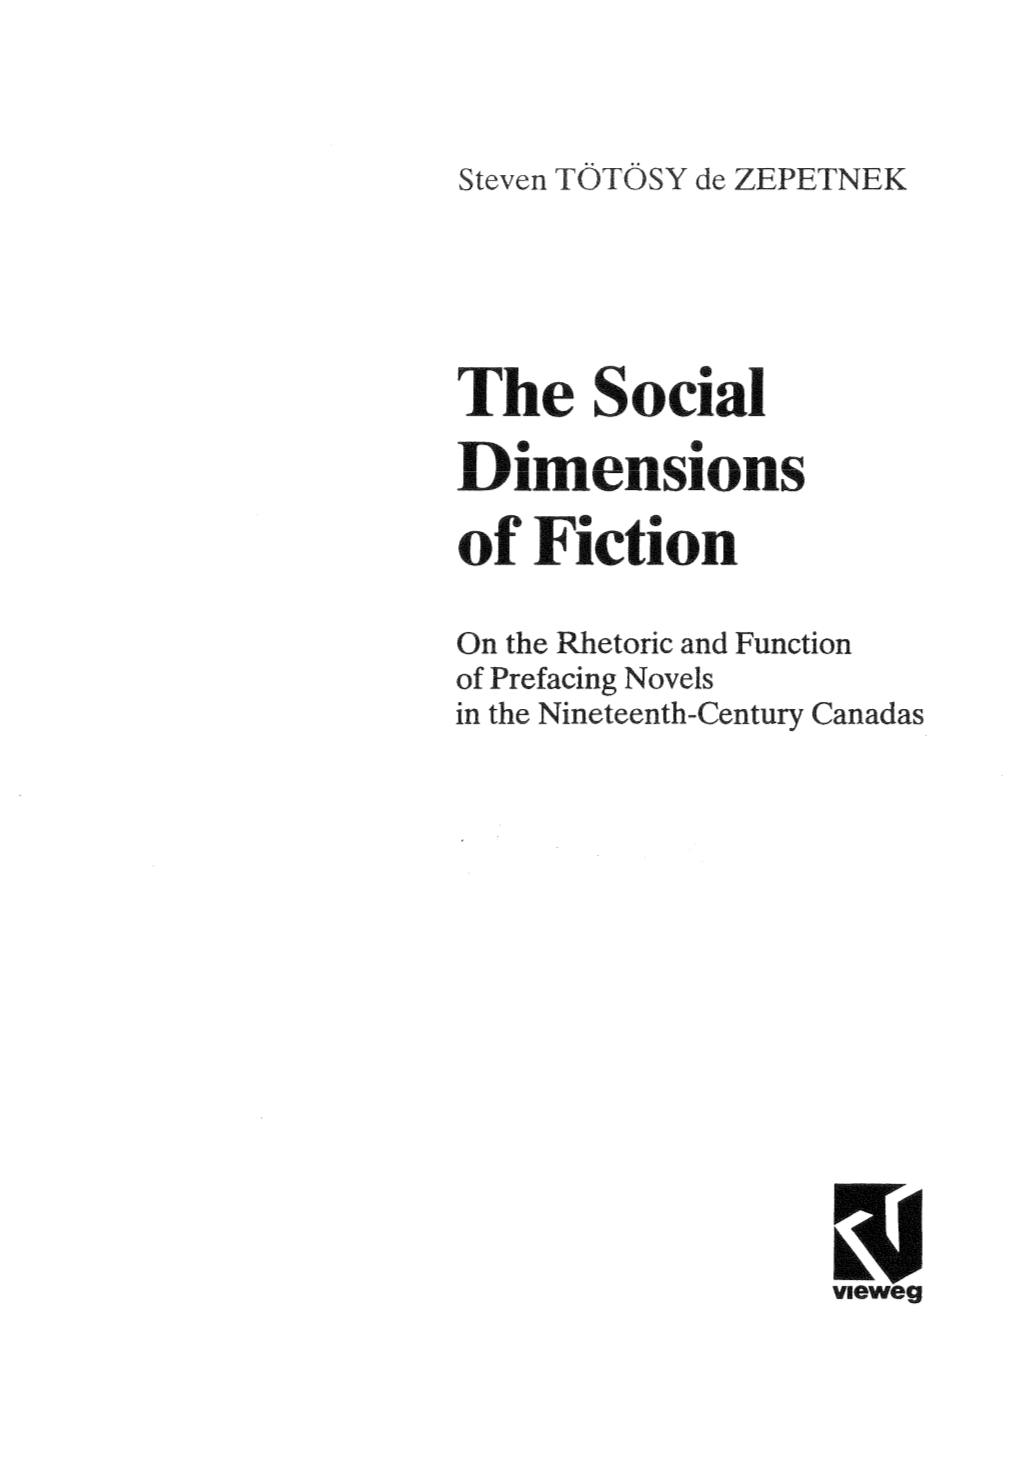 The Social Dimensions of Fiction: on the Rhetoric and Function of Prefacing Novels in the Nineteenth Century Canadas I Steven Totosy De Zepetnek